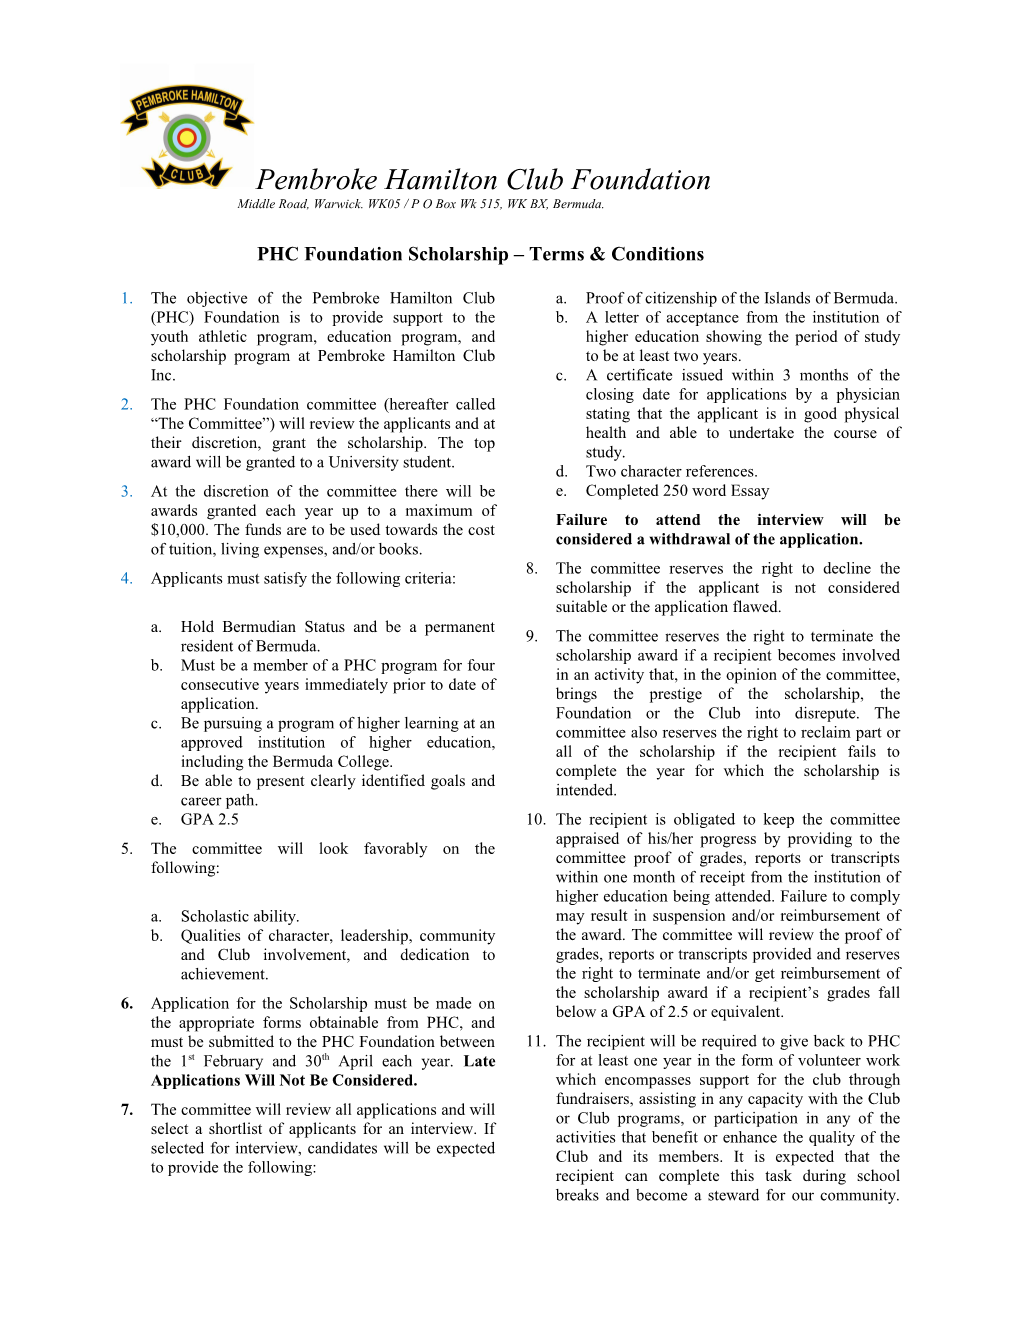 PHC Foundation Scholarship Terms & Conditions